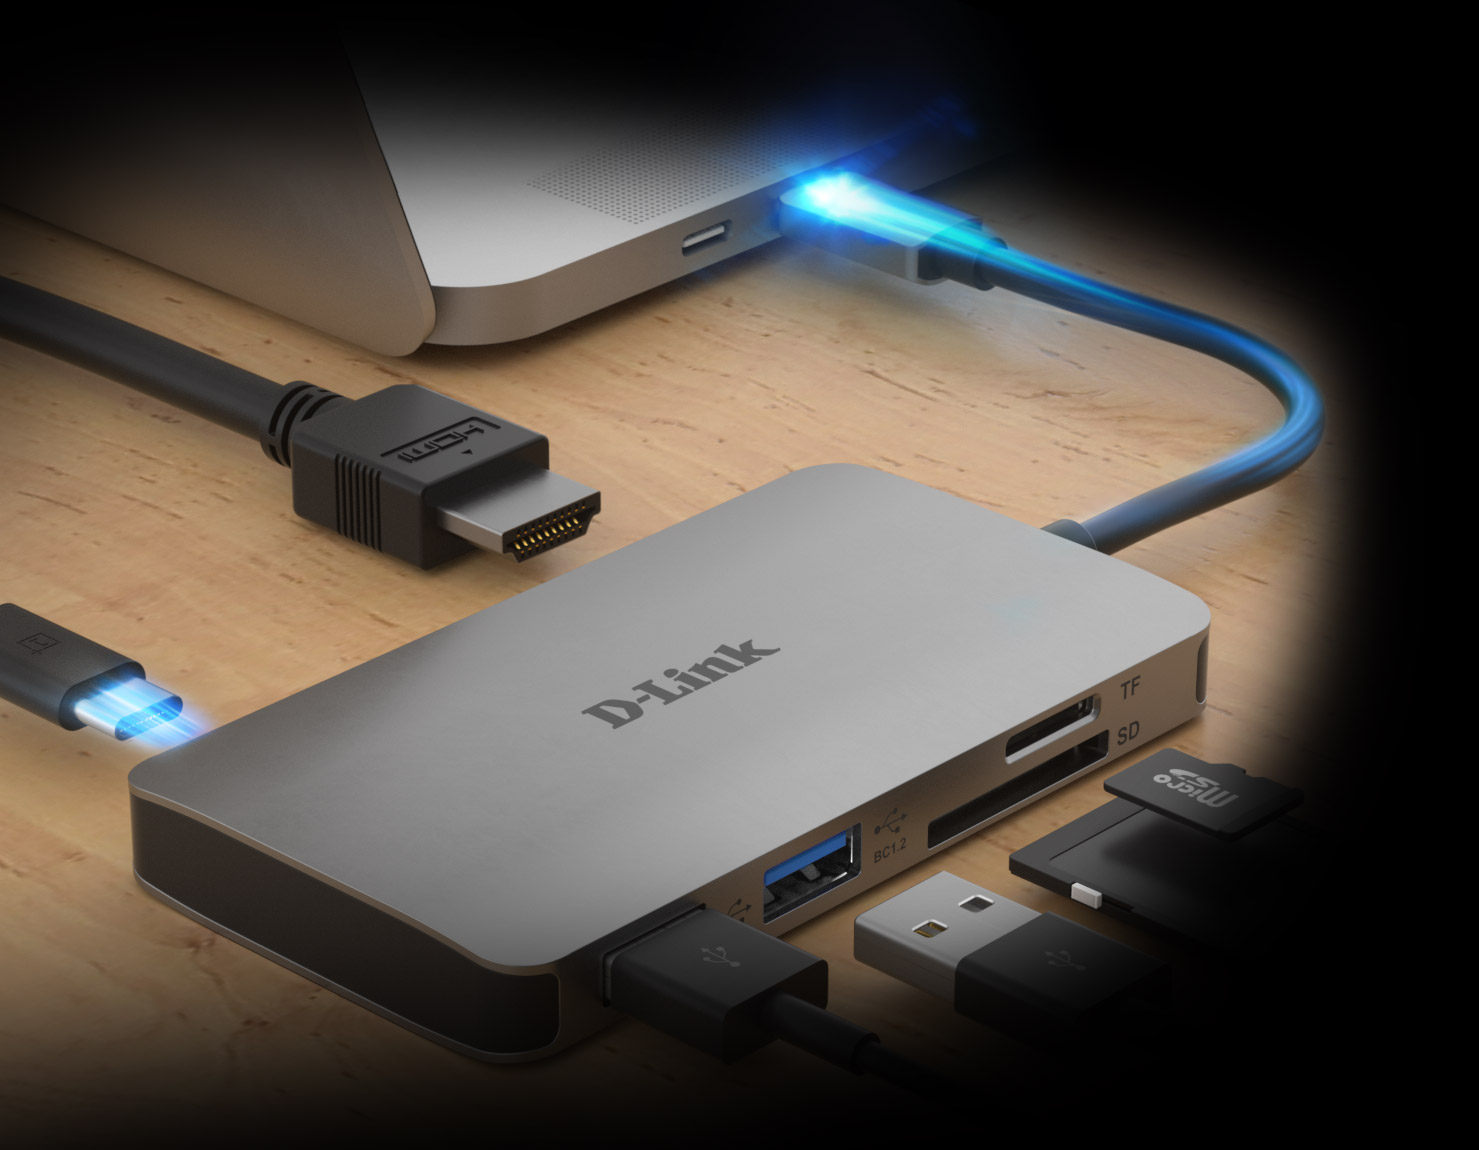 DUB-M610 6-in-1 USB-C Hub with HDMI/Card Reader/Power Delivery connected to a laptop showing example connections